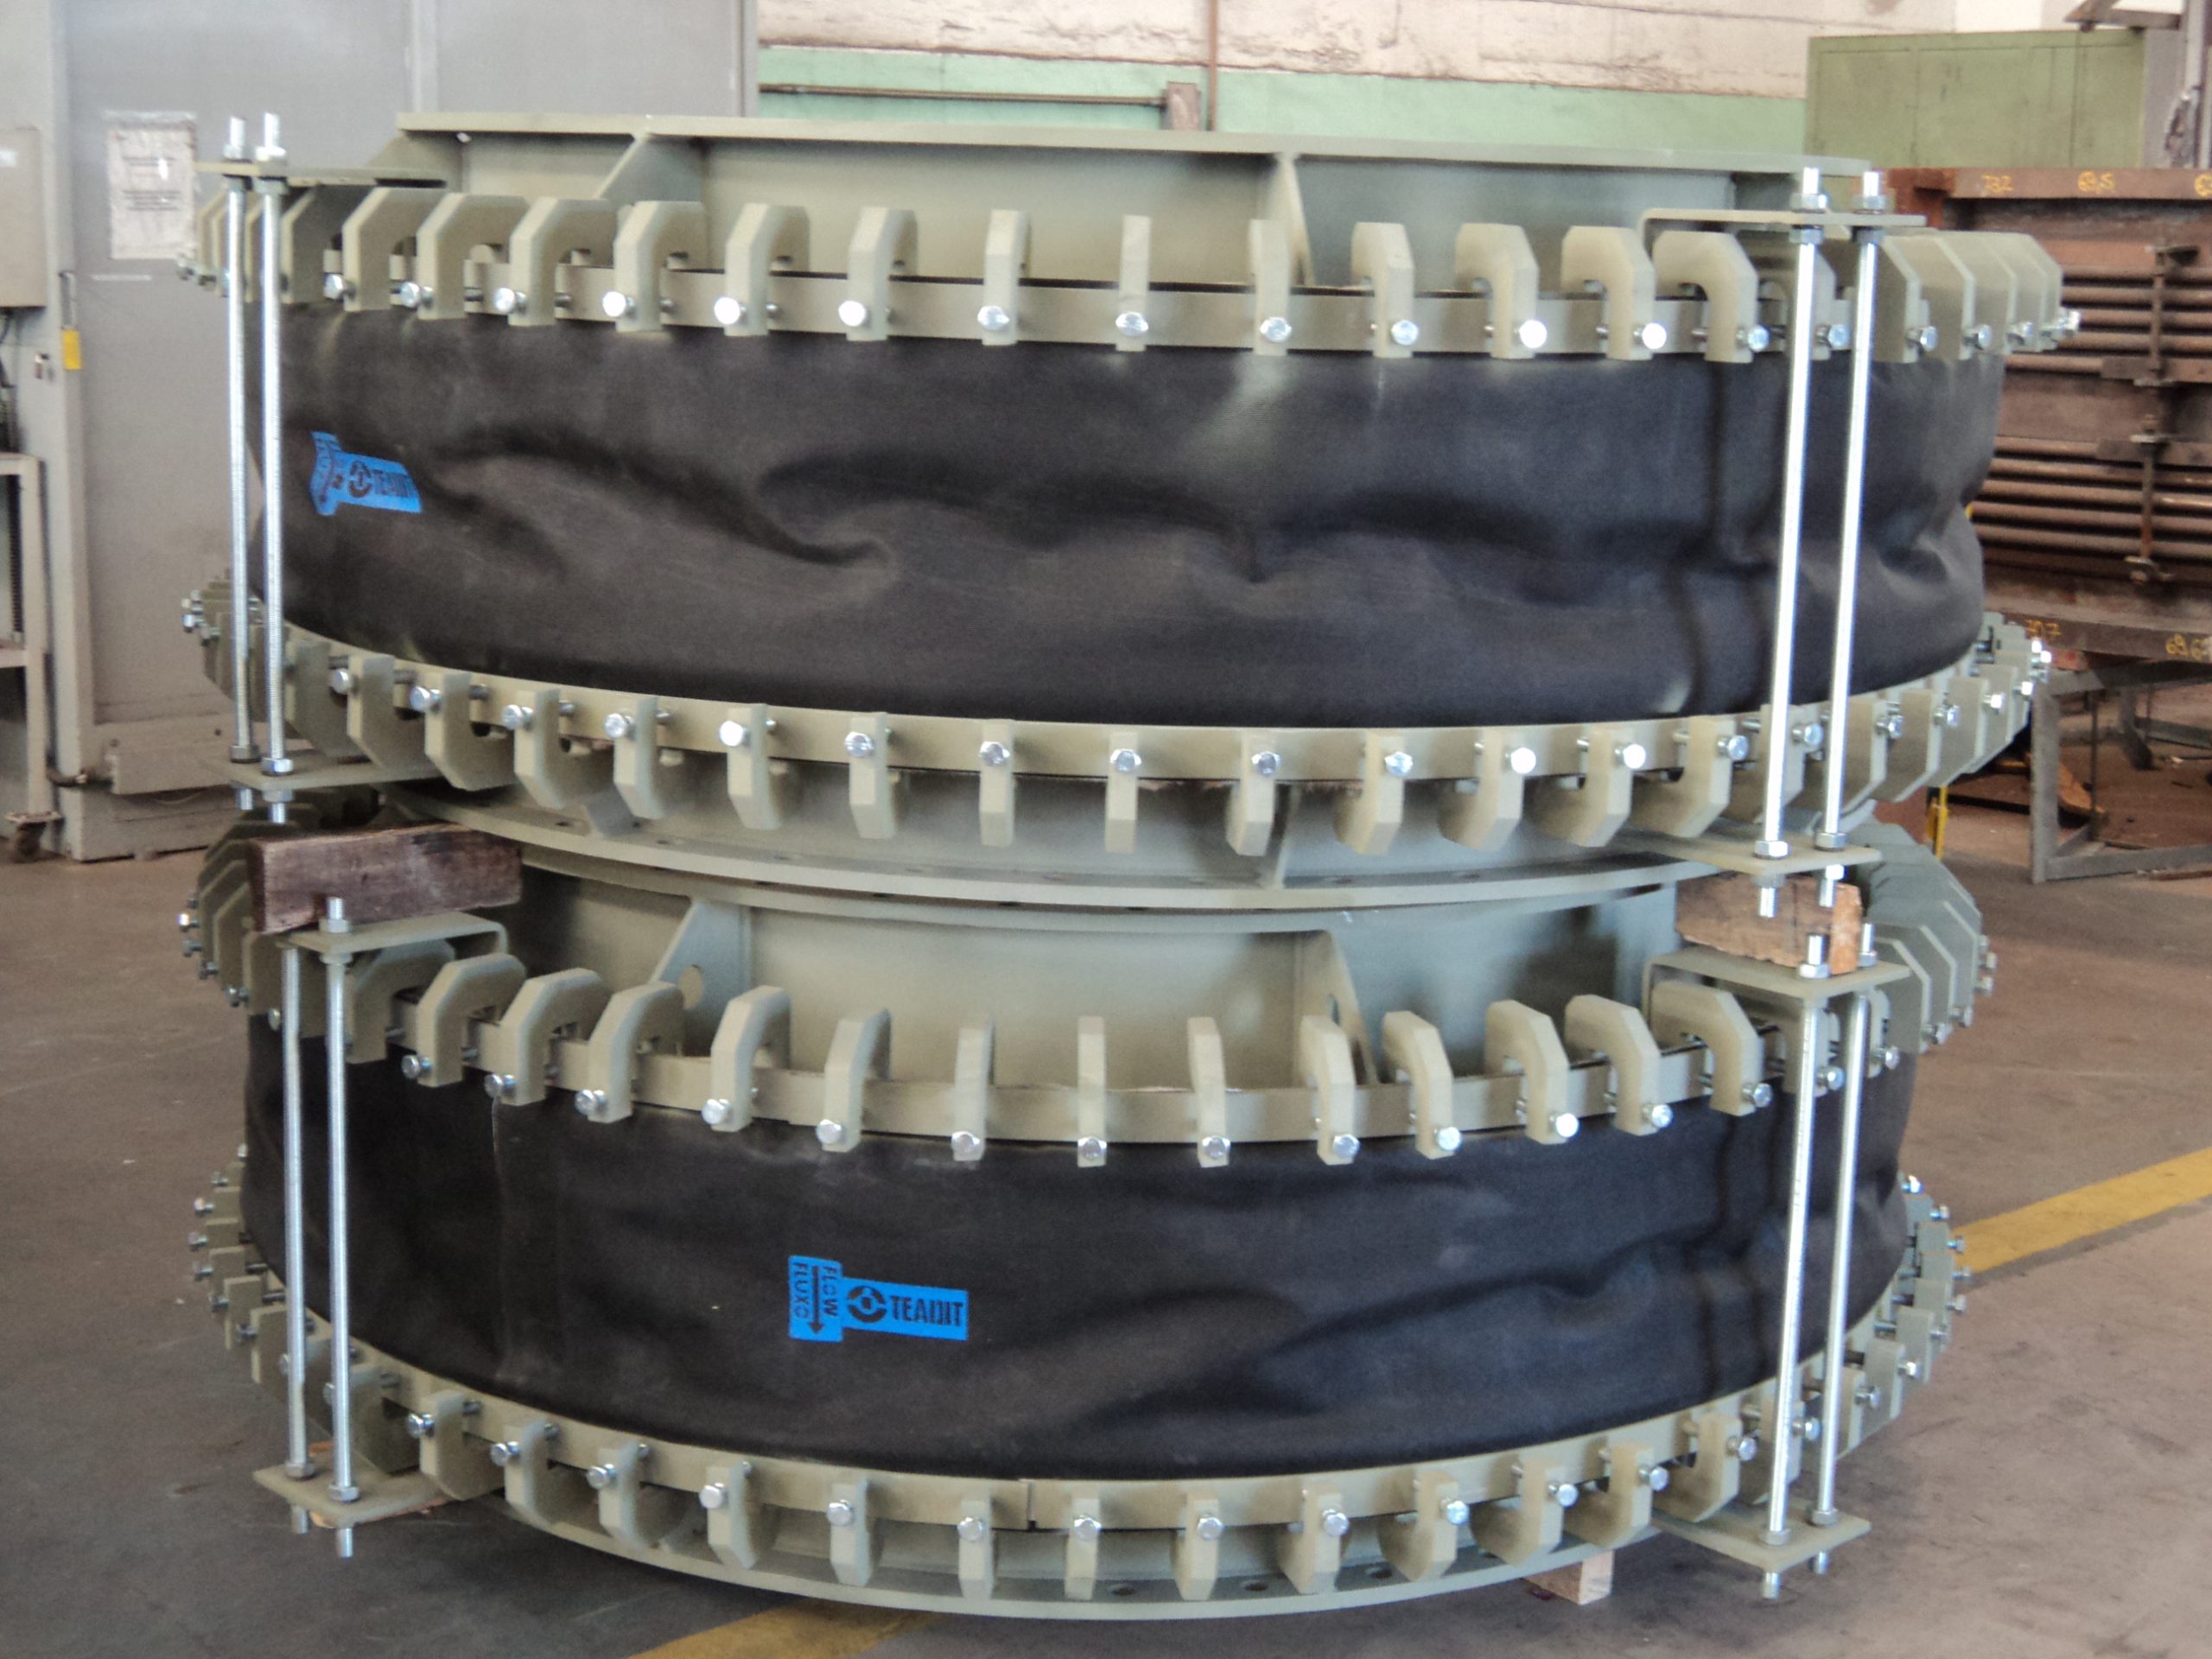 Teadit fabric expansion joint